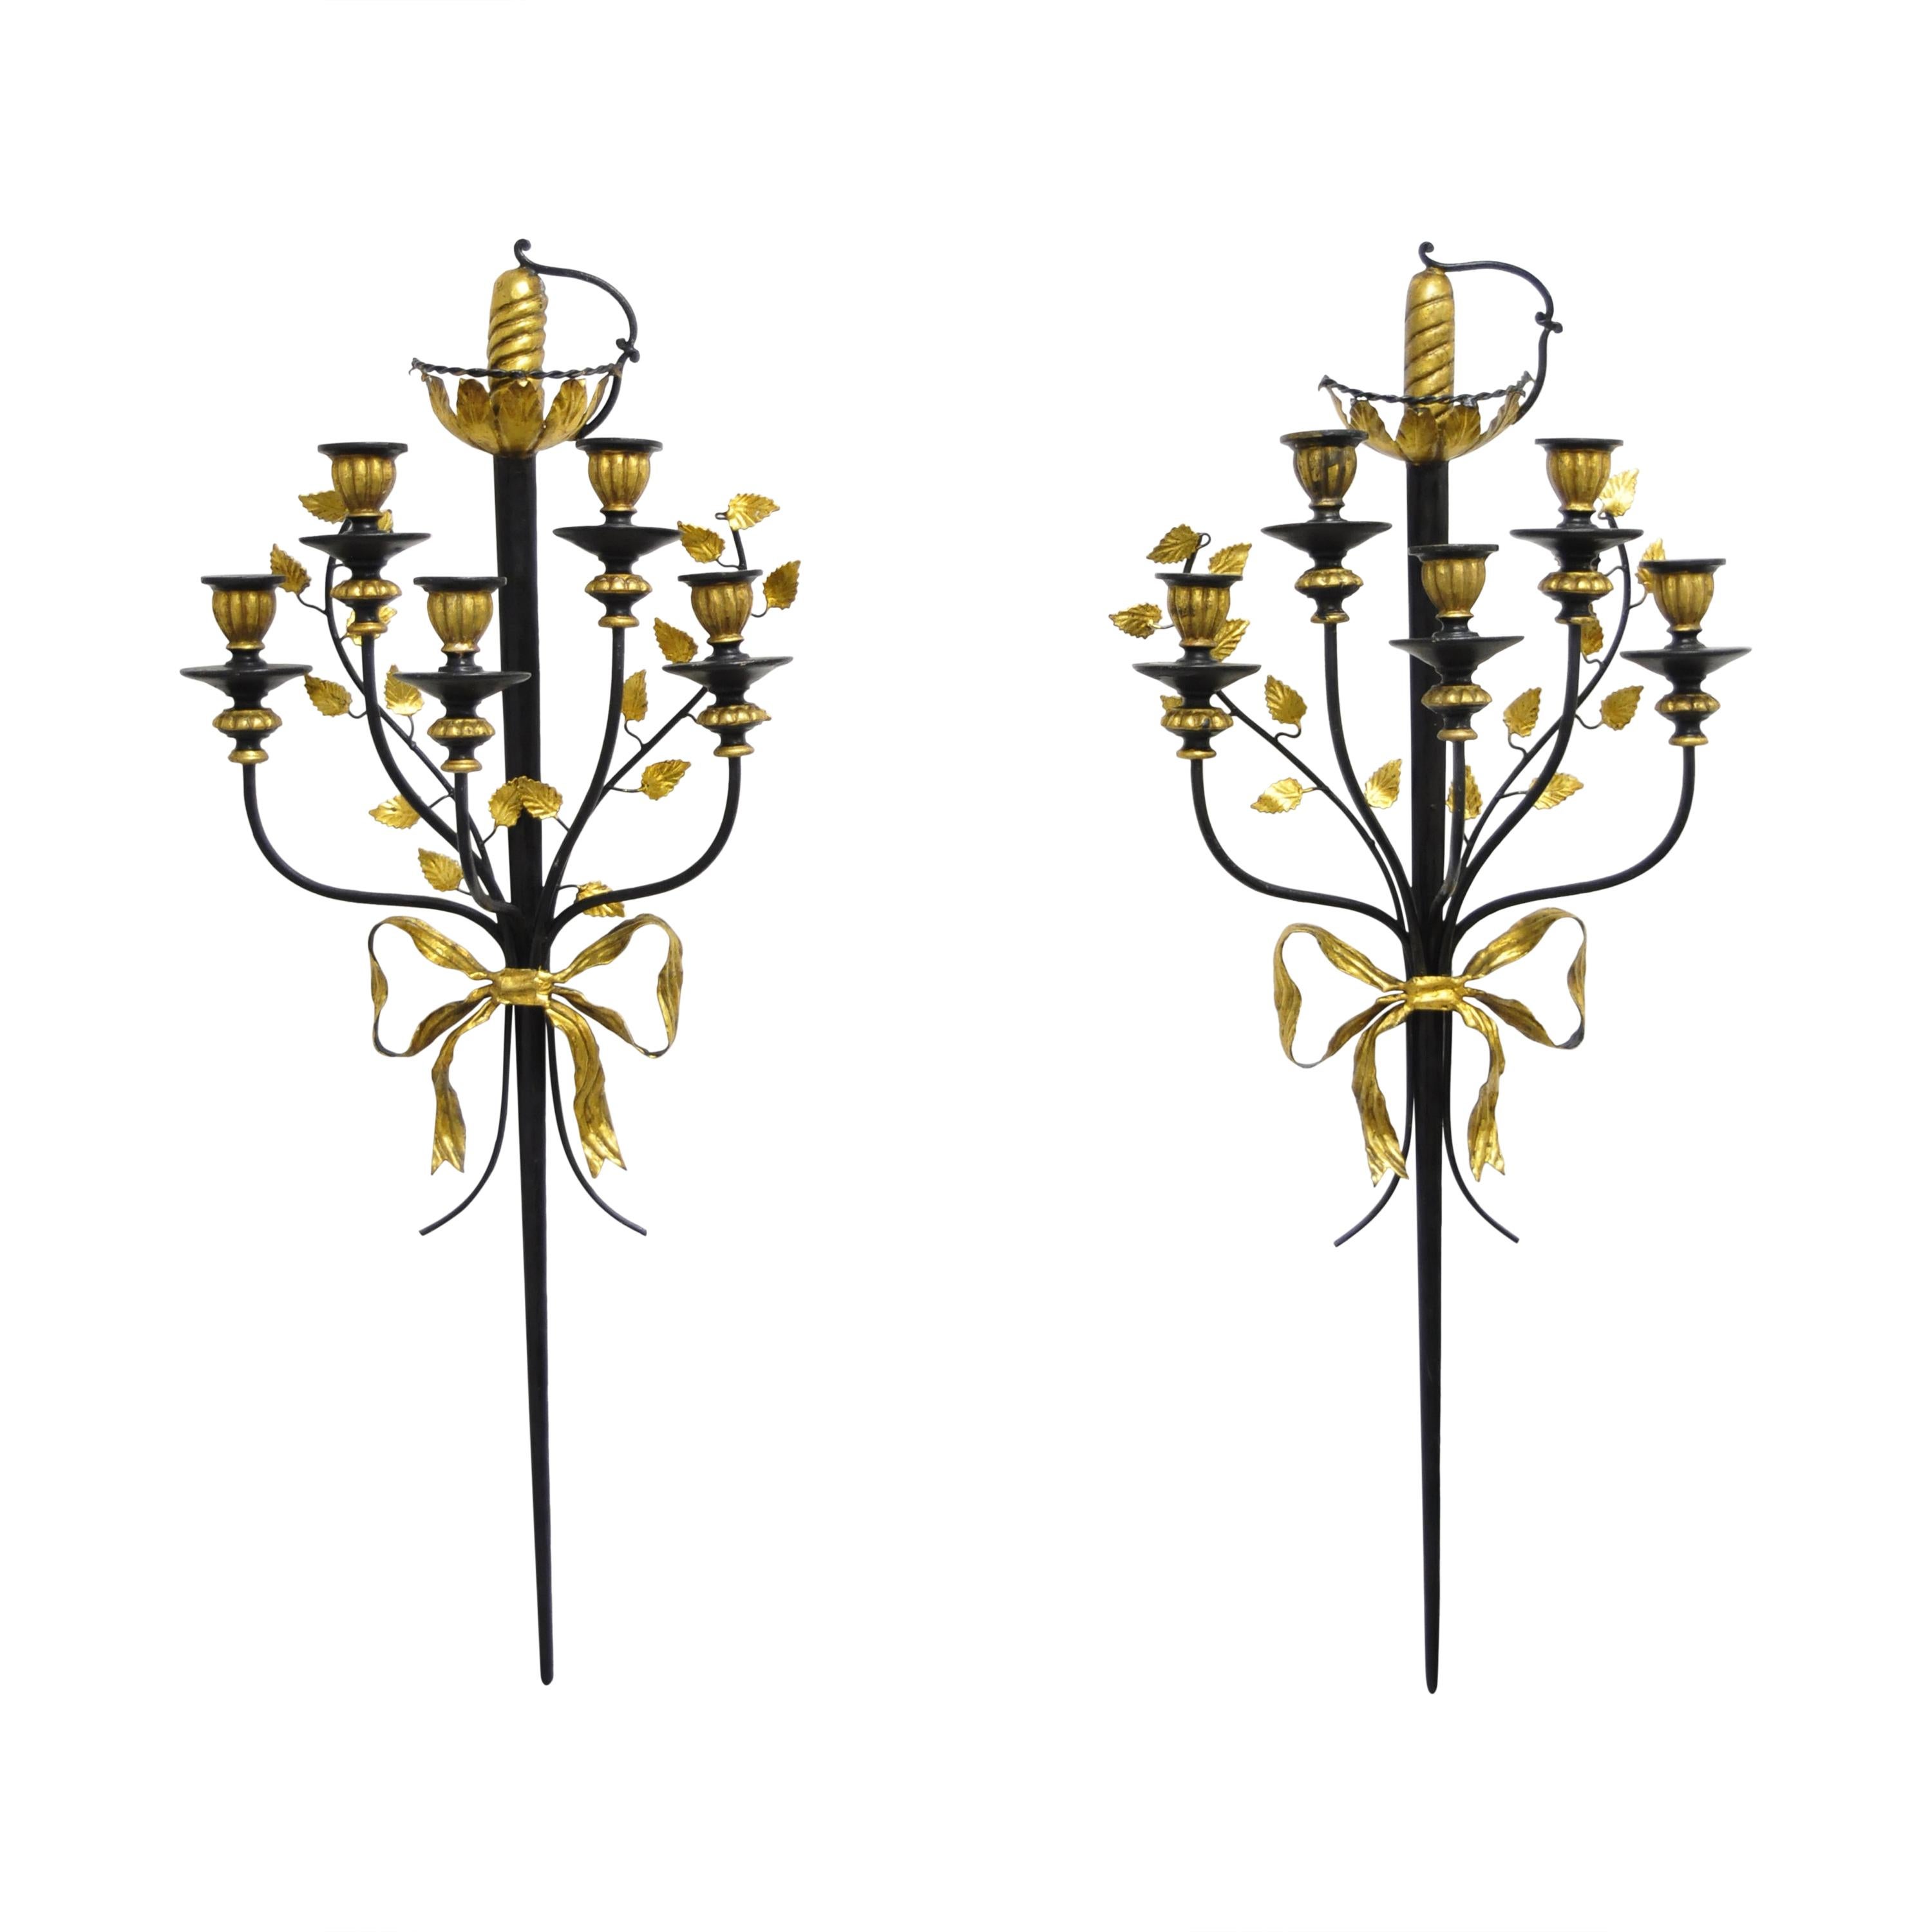 Pair of Vintage Italian Regency Black & Gold Iron Tole Sword Candle Wall Sconces